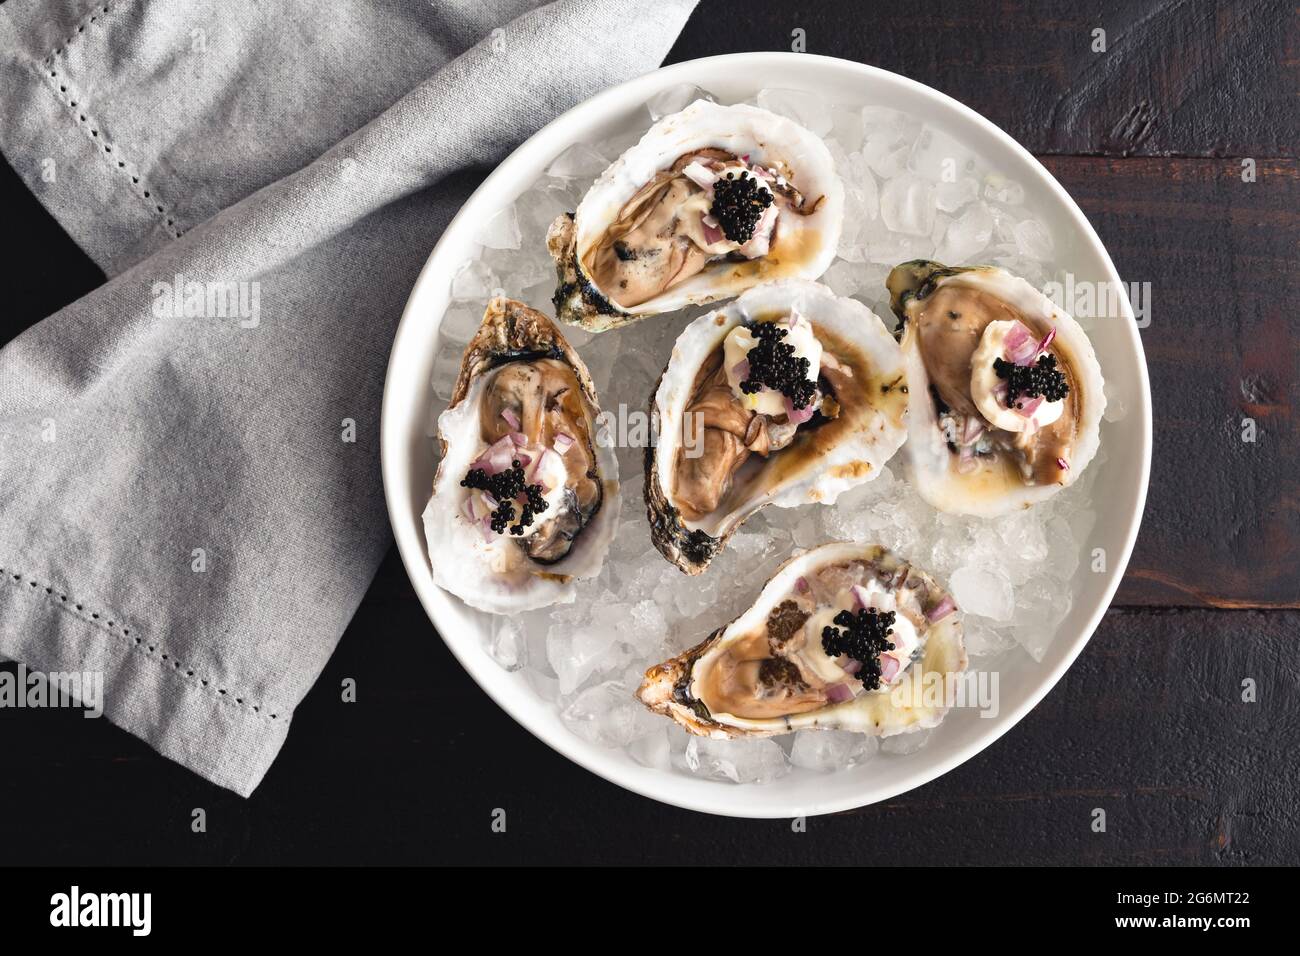 Dirty Oysters Served in a Bowl of Crushed Ice: Raw oysters topped with caviar, minced shallot, and creme fraiche Stock Photo